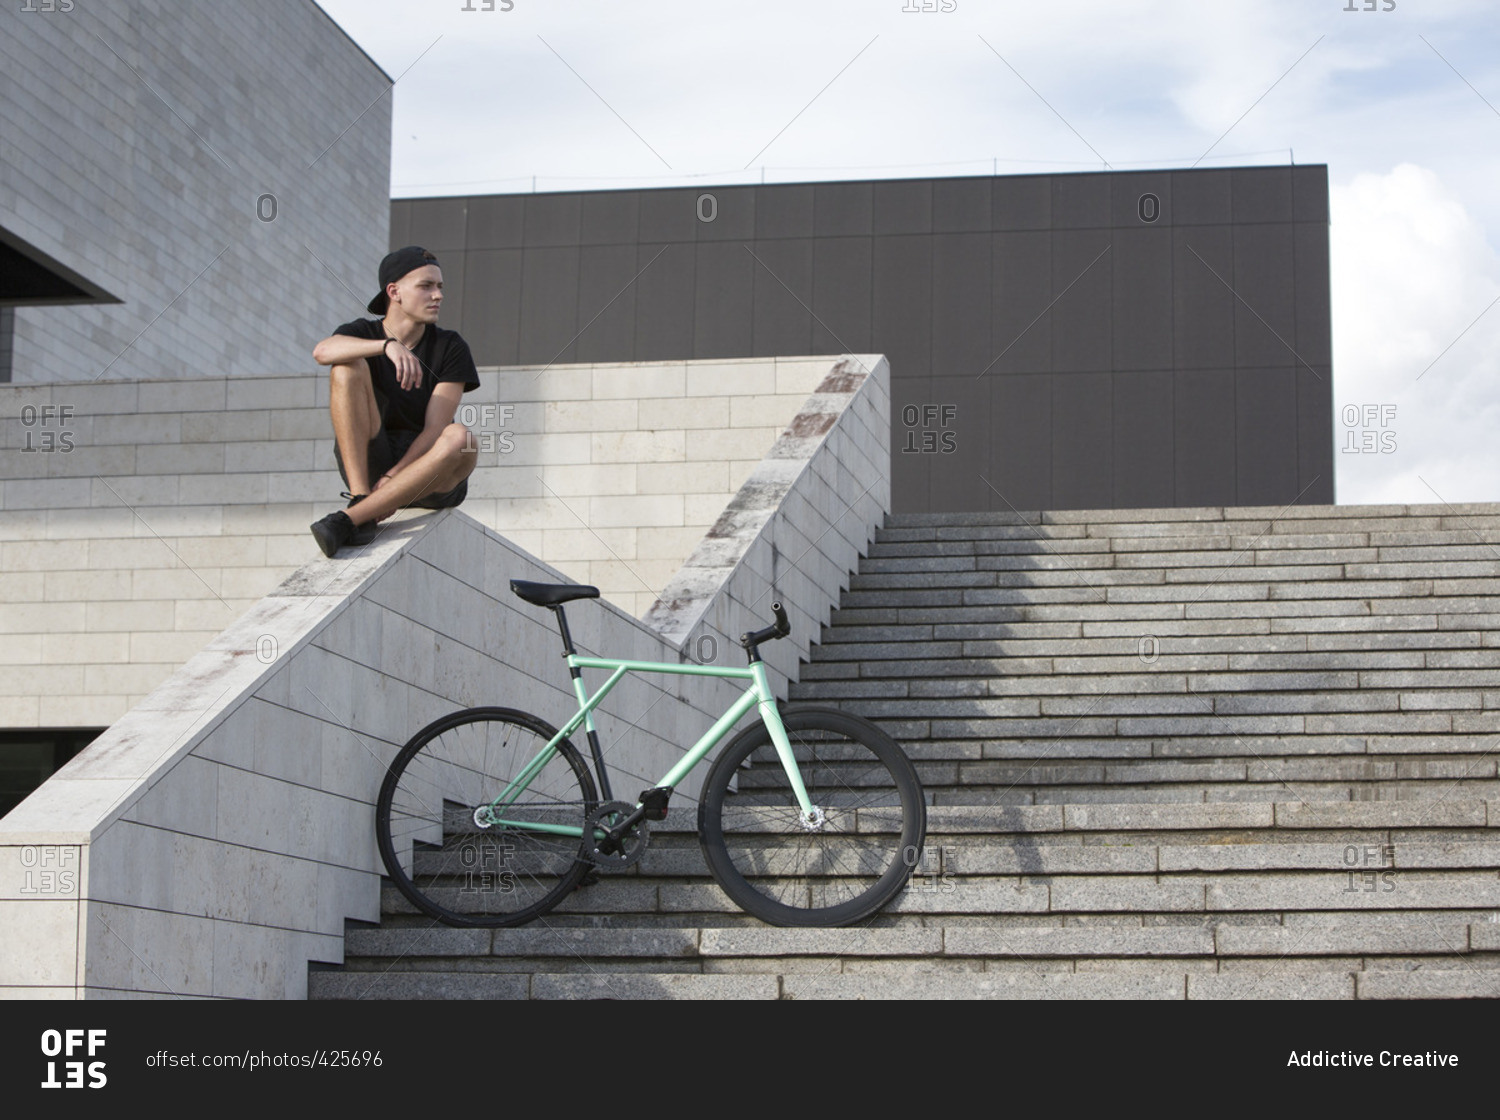 Young boy sitting on stone railing with his bike on stairs